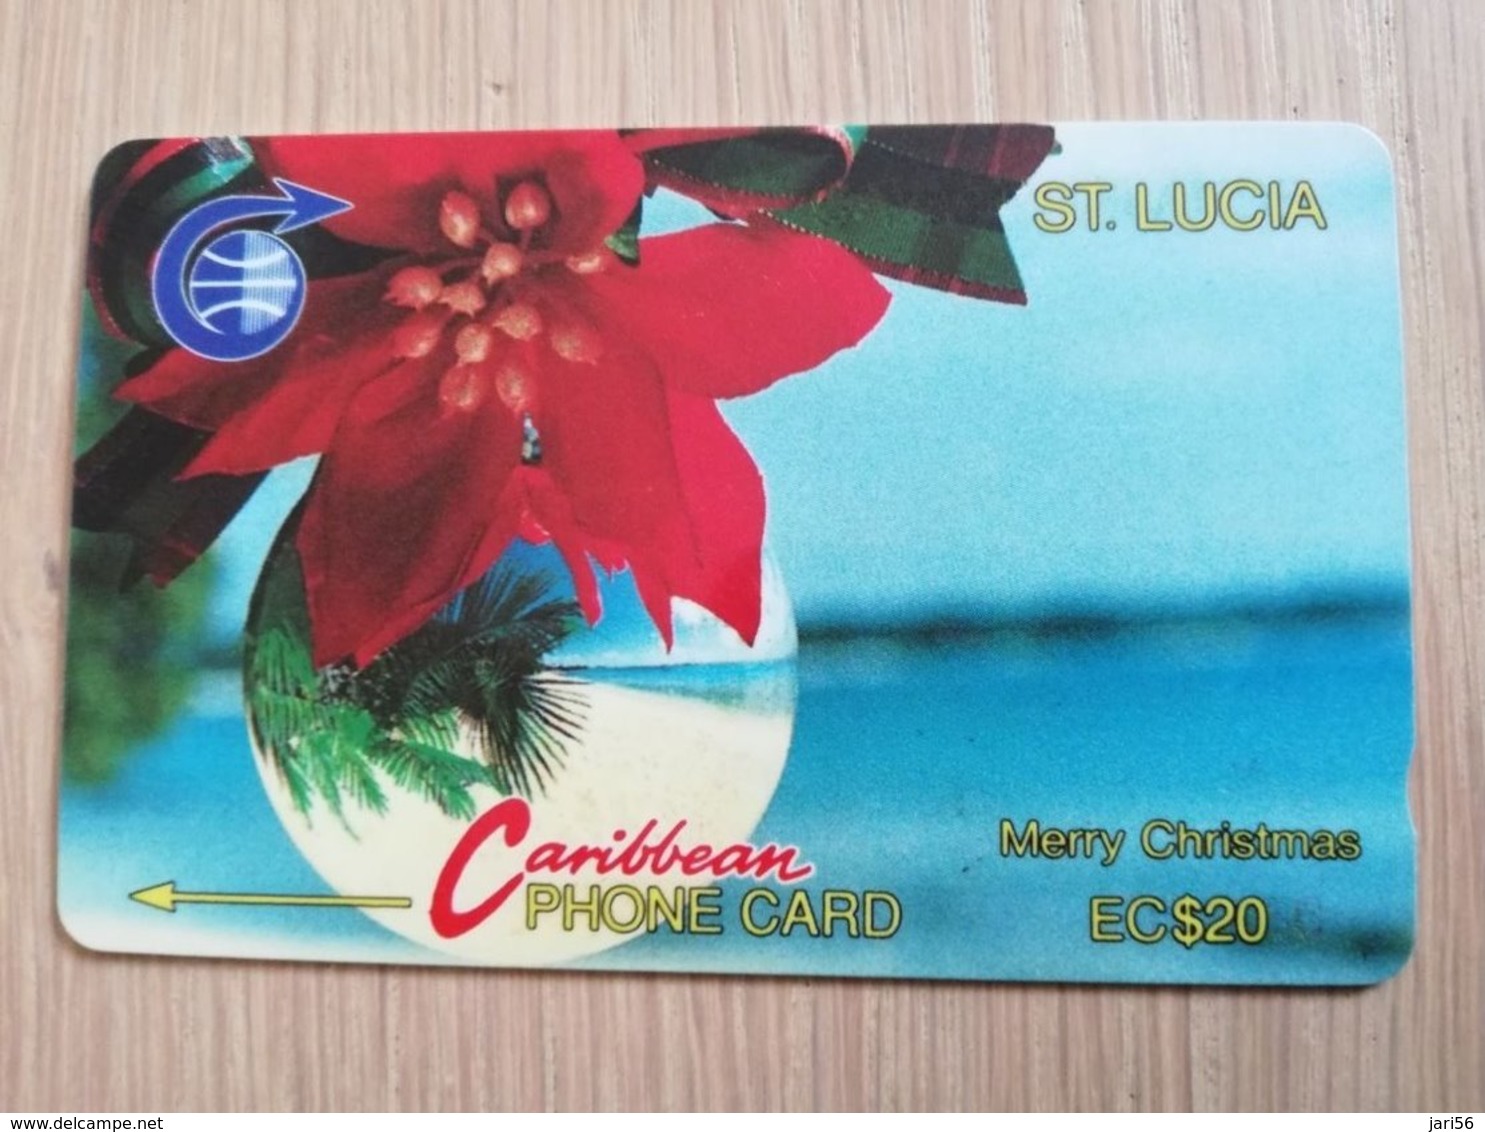 ST LUCIA    $ 20  CABLE & WIRELESS  STL-5A   5CSLA   CHRISTMAS  Fine Used Card ** 2387** - St. Lucia